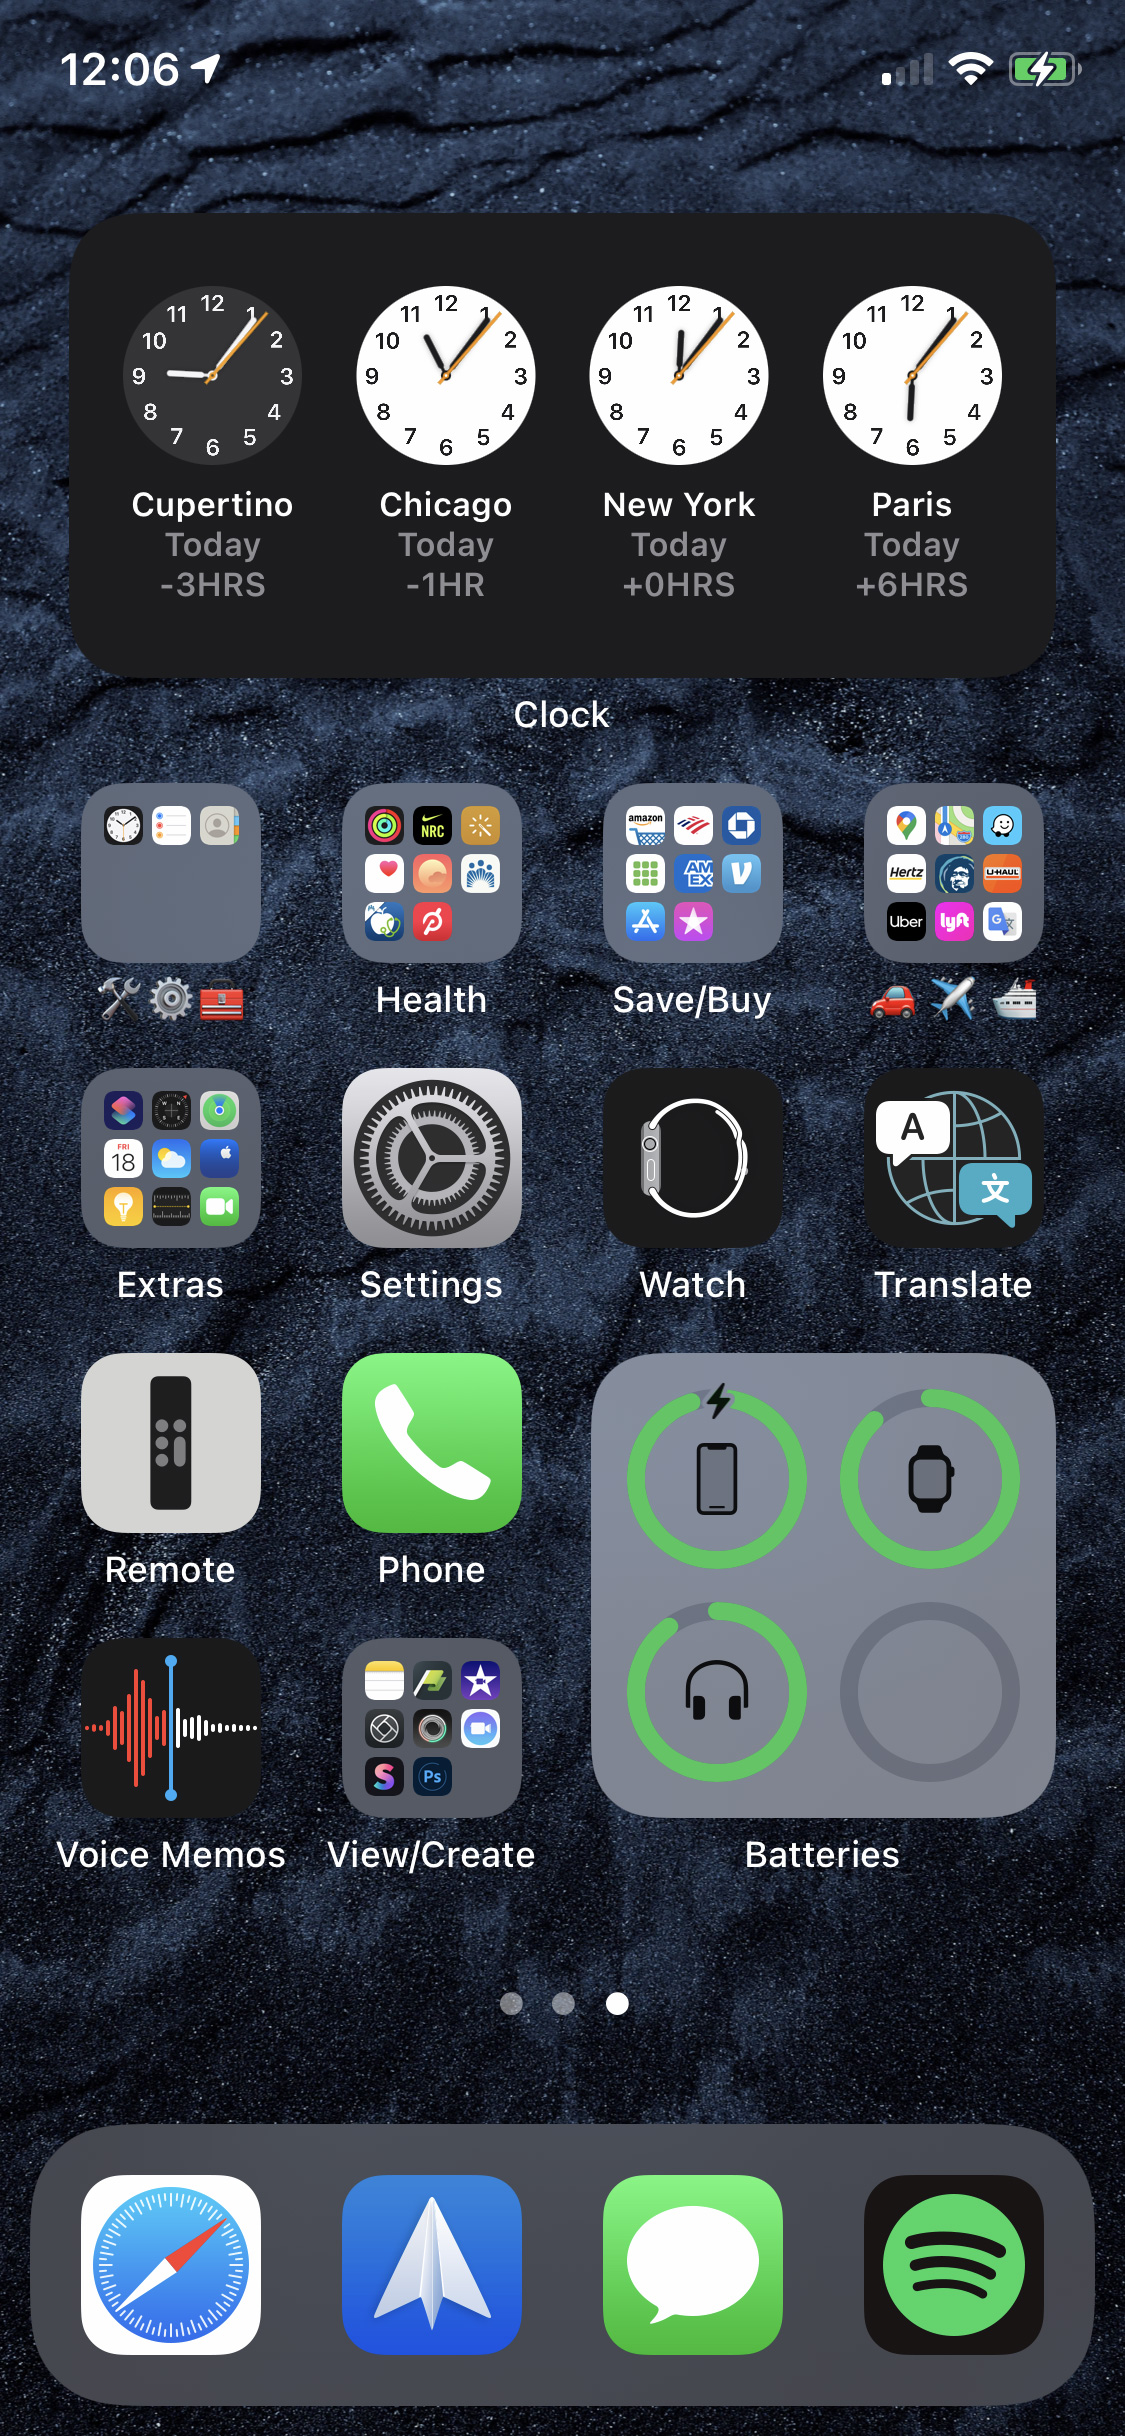 Home Screen 3 - System Utilities and Miscellaneous Apps